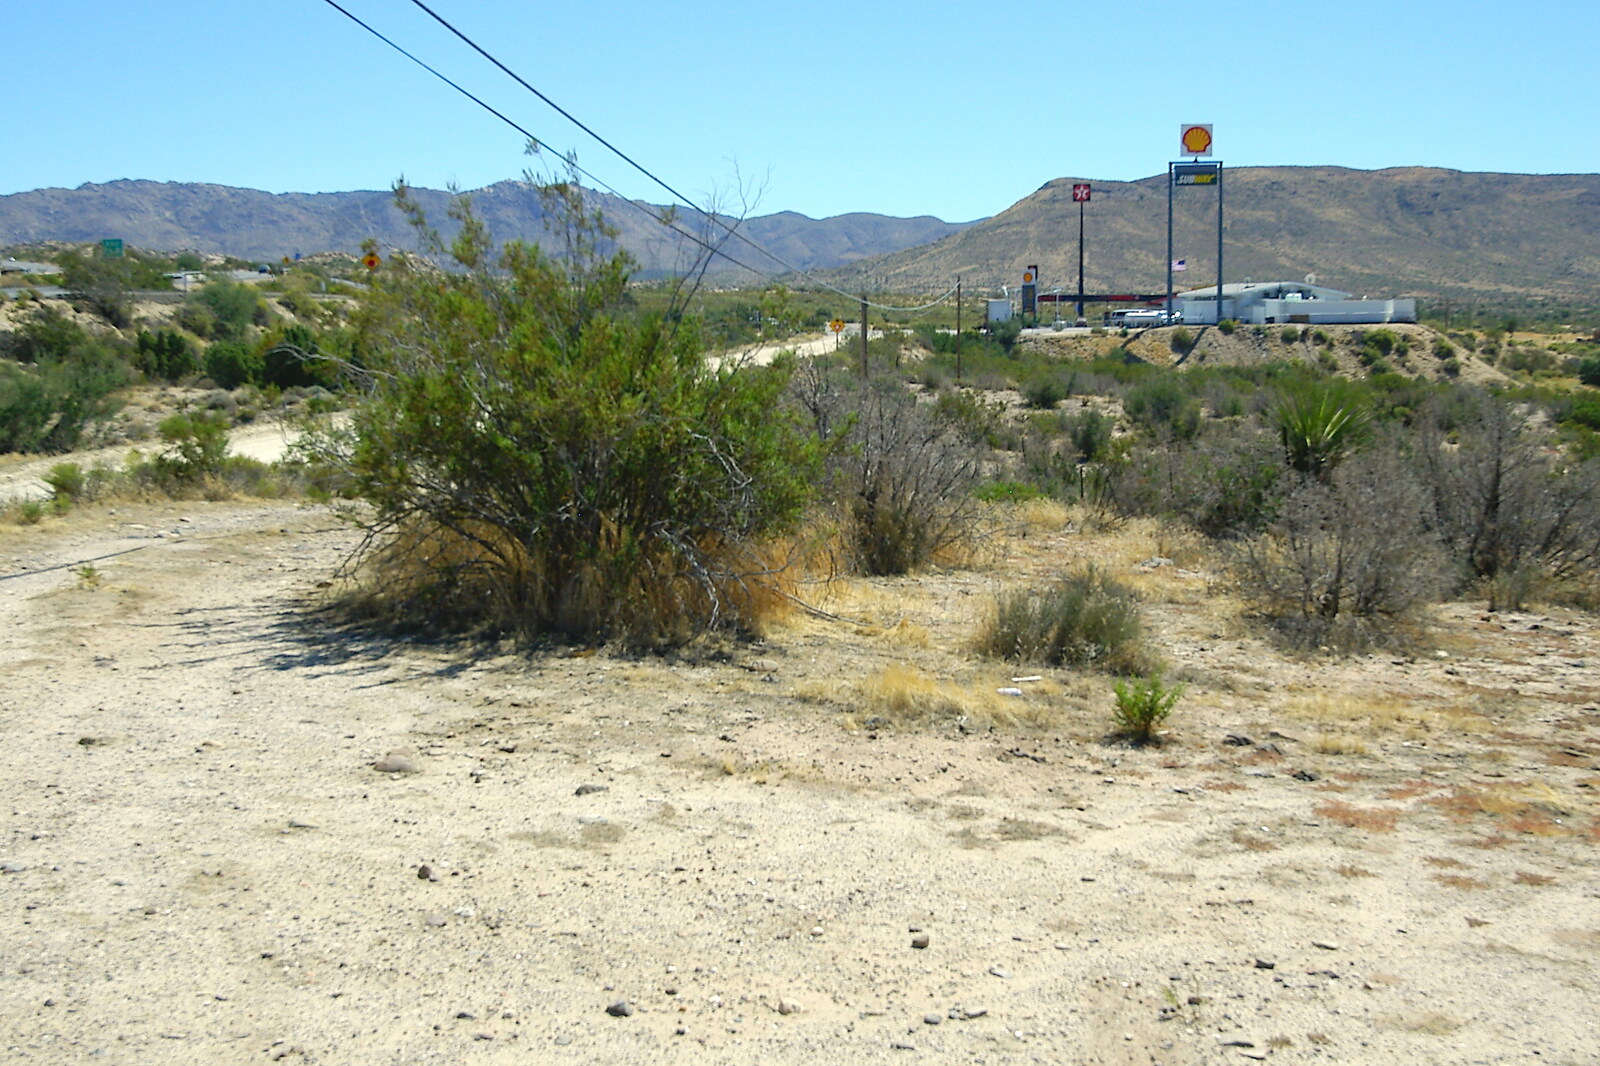 Desert scrub and a petrol station from California Desert: El Centro, Imperial Valley, California, US - 24th September 2005